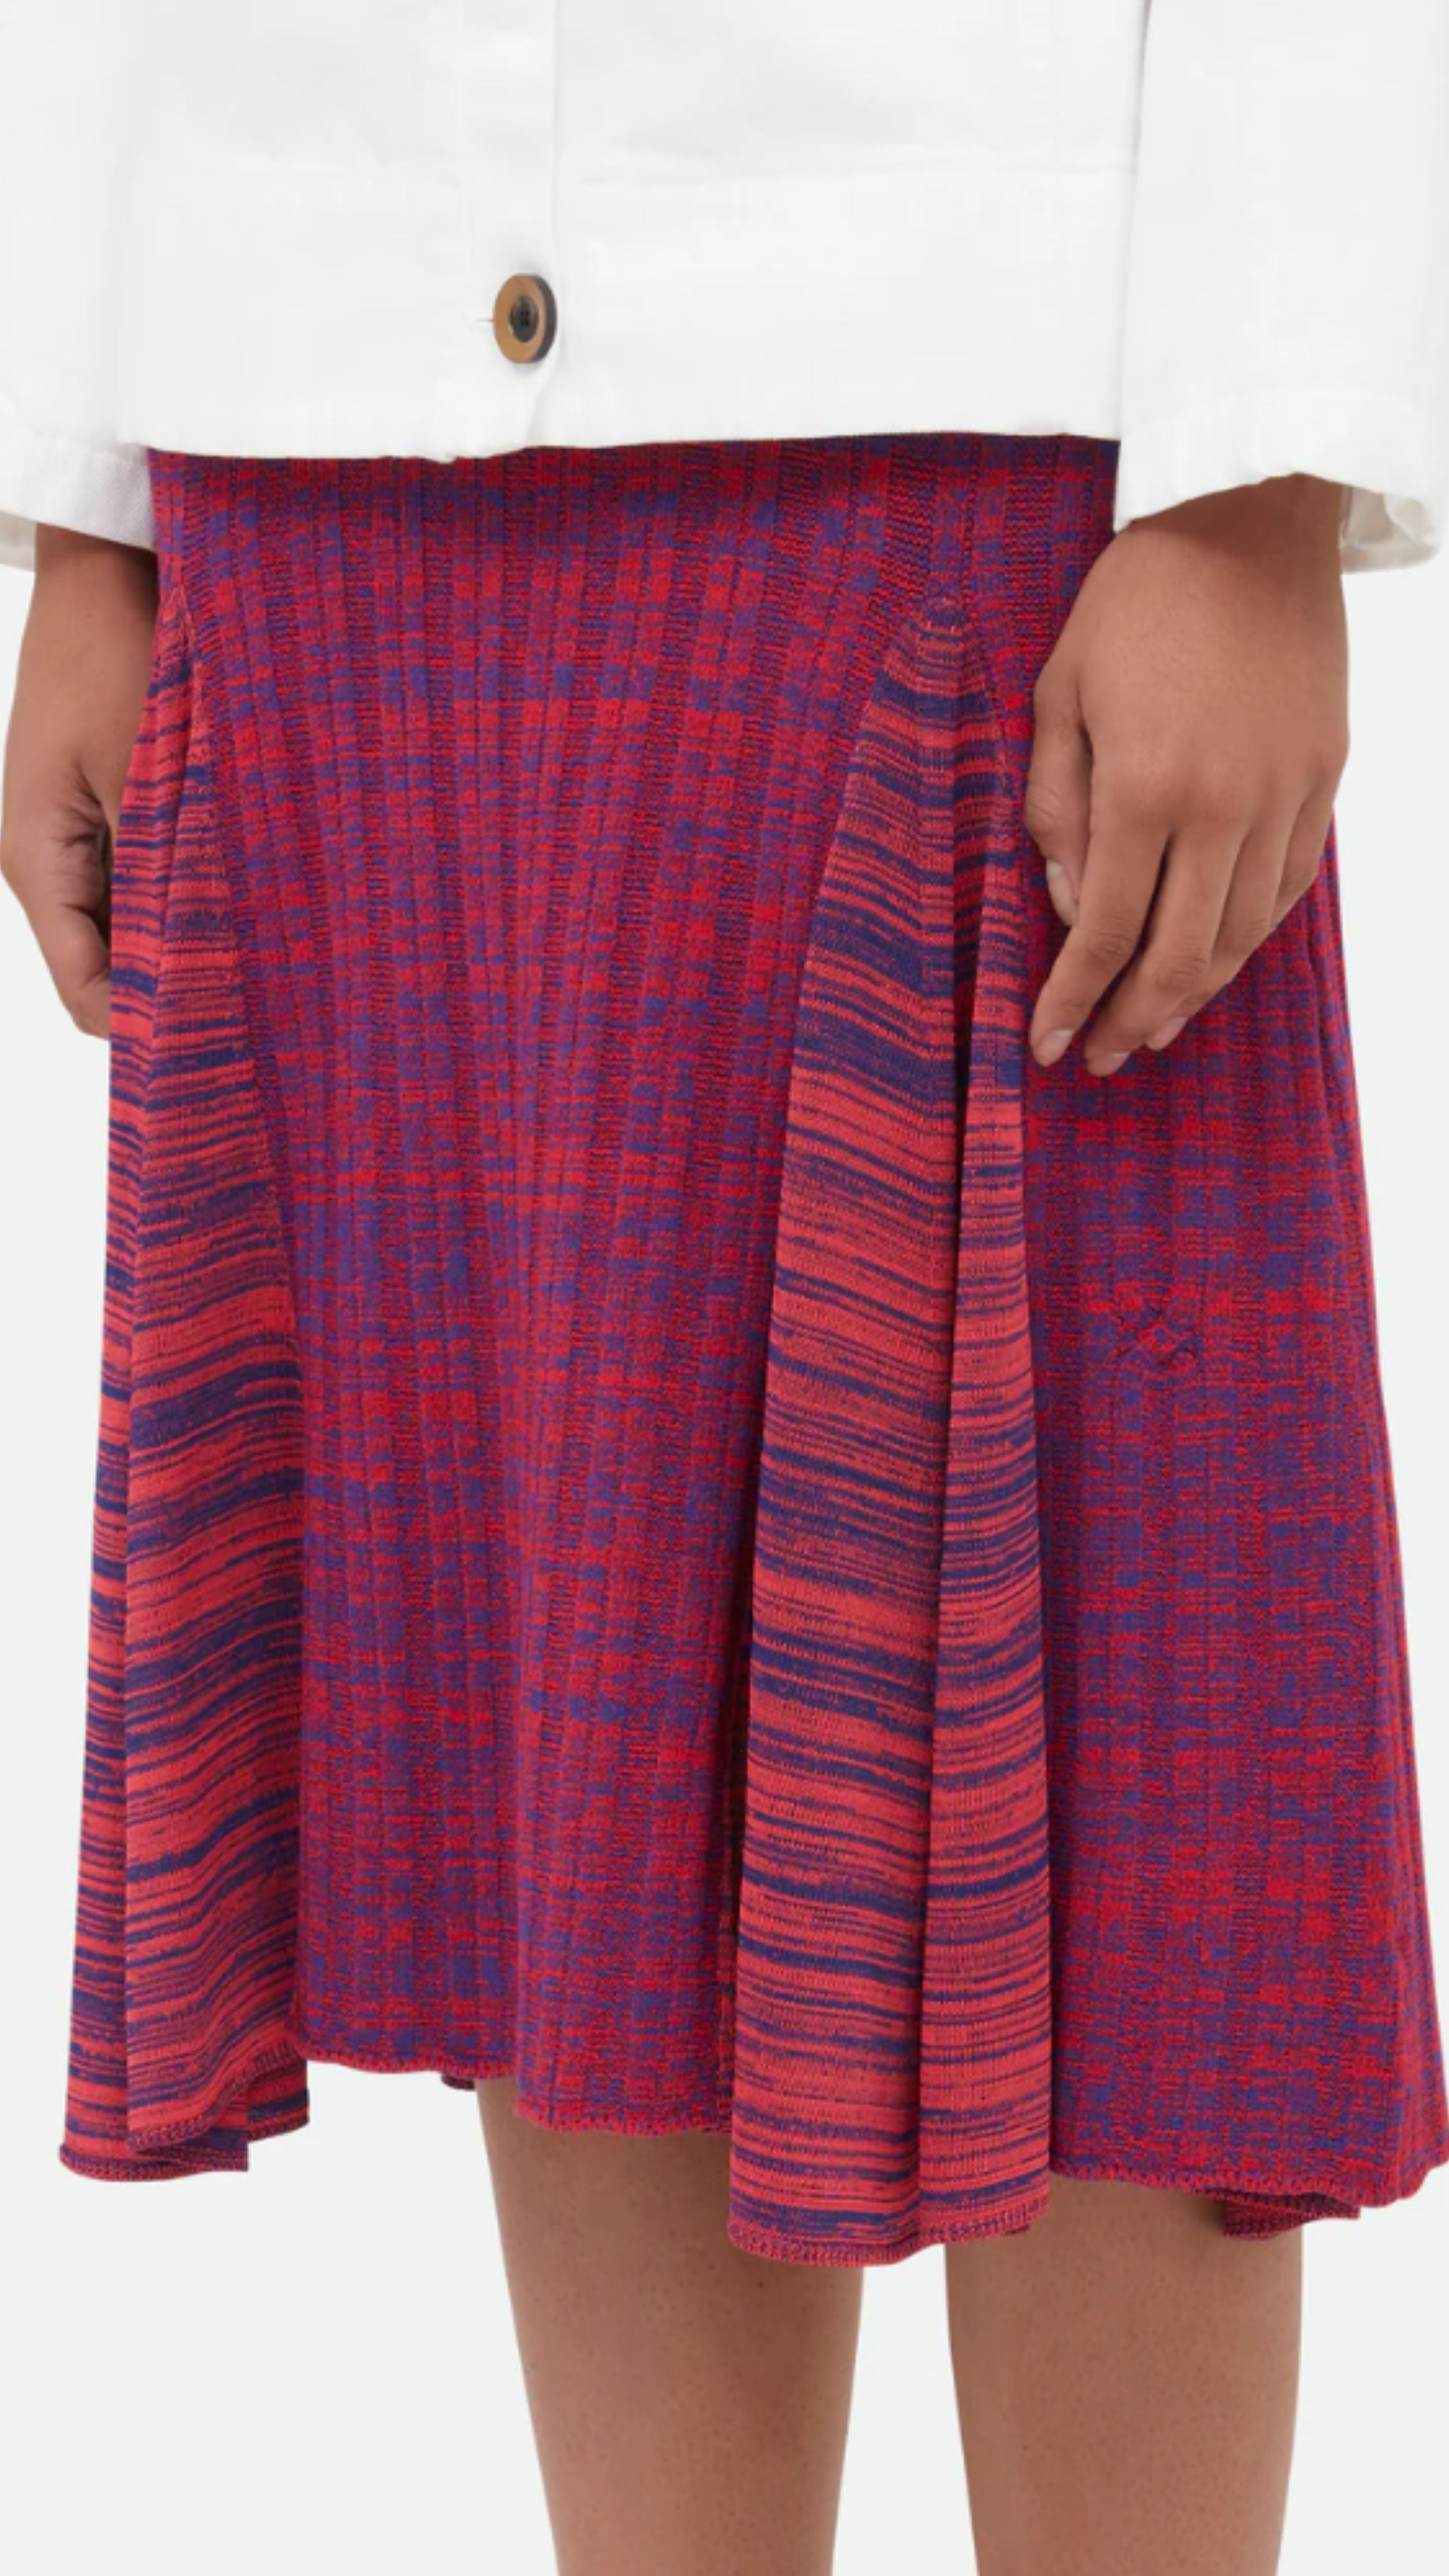 Wales Bonner Nile Skirt This A-line midi skirt features an elastic waist and beautiful pleats at the mid-thigh. Woven striped pattern in red and purples. The skirt falls to knee length. Detail photo of skirt on model.